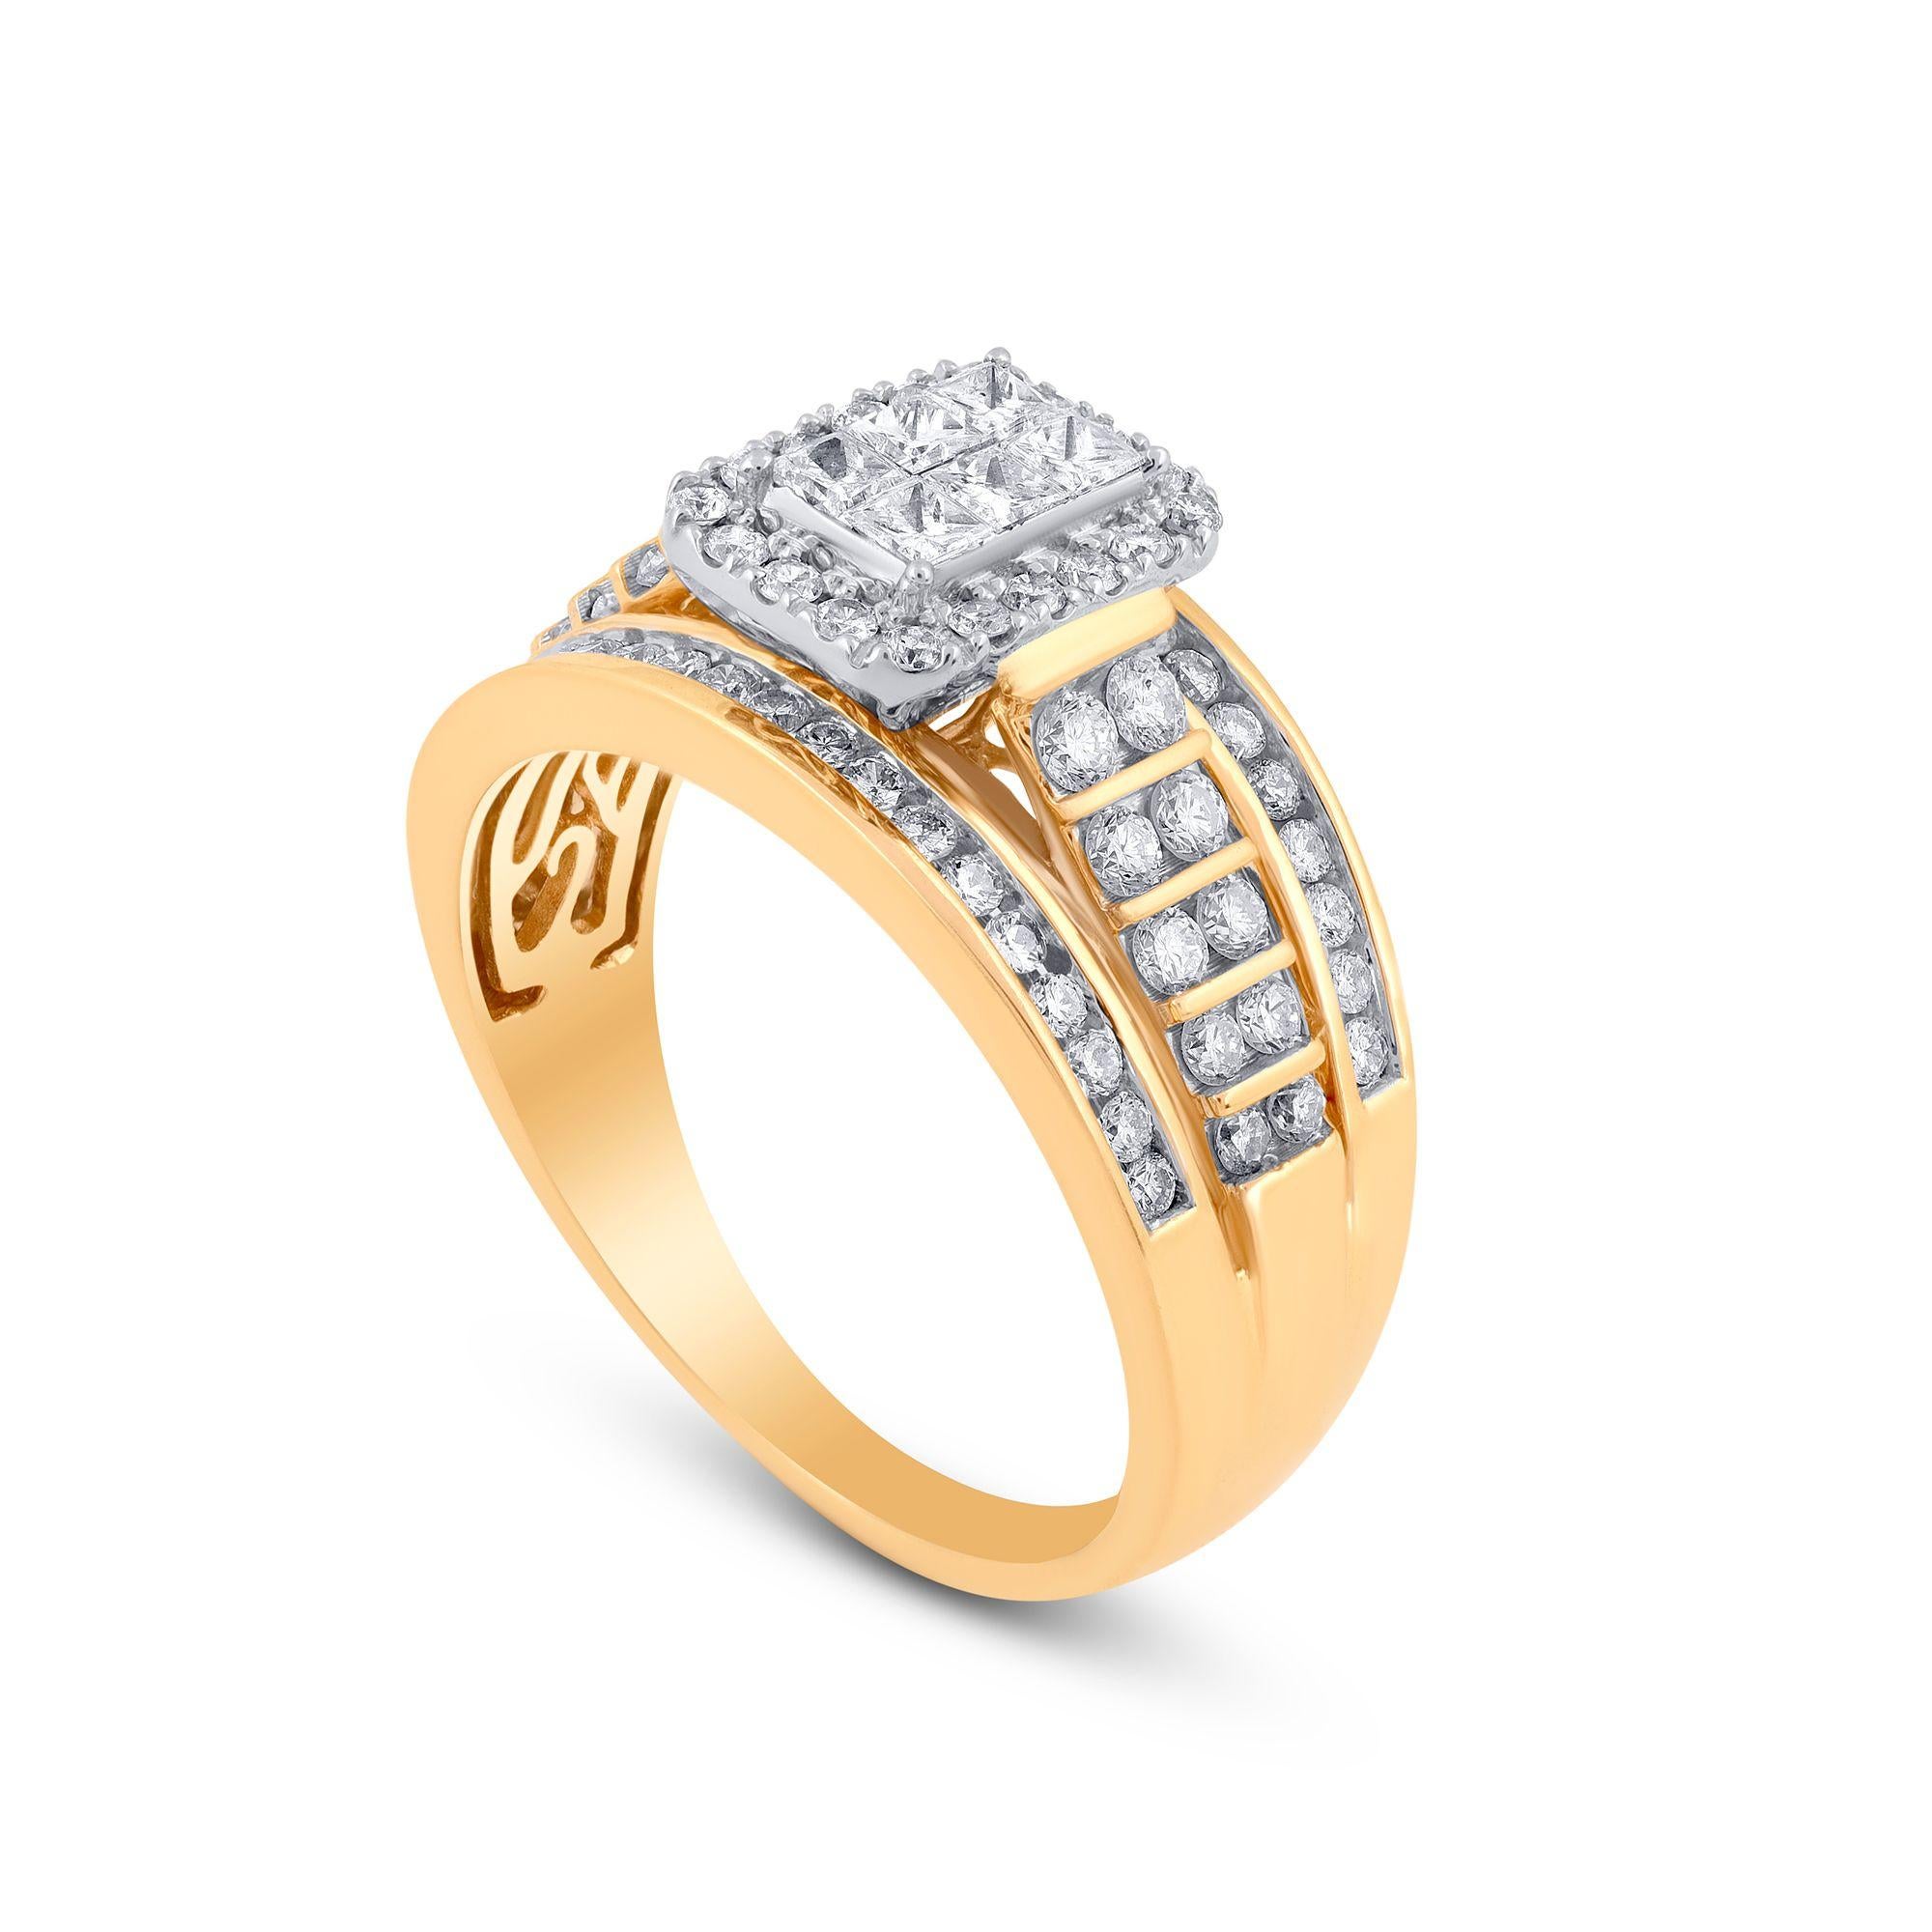 Exquisitely designed diamond engagement ring studded with 80 diamonds in channel, micro-pave and nick setting, crafted in 14 karat yellow gold. Diamonds are graded G-H Color, I1-I2 Clarity. 
